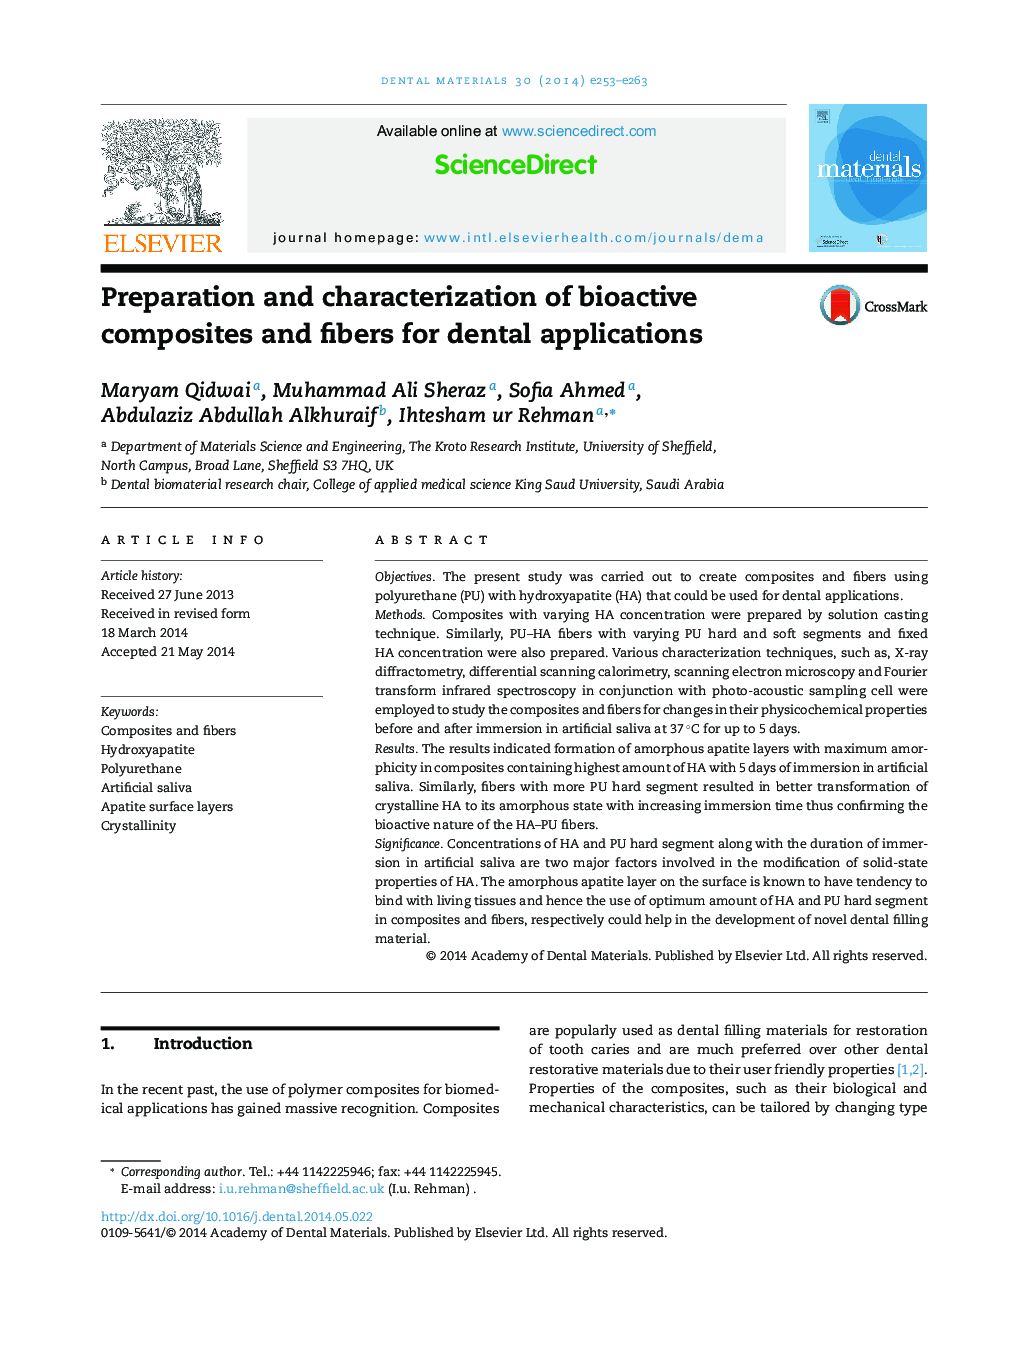 Preparation and characterization of bioactive composites and fibers for dental applications